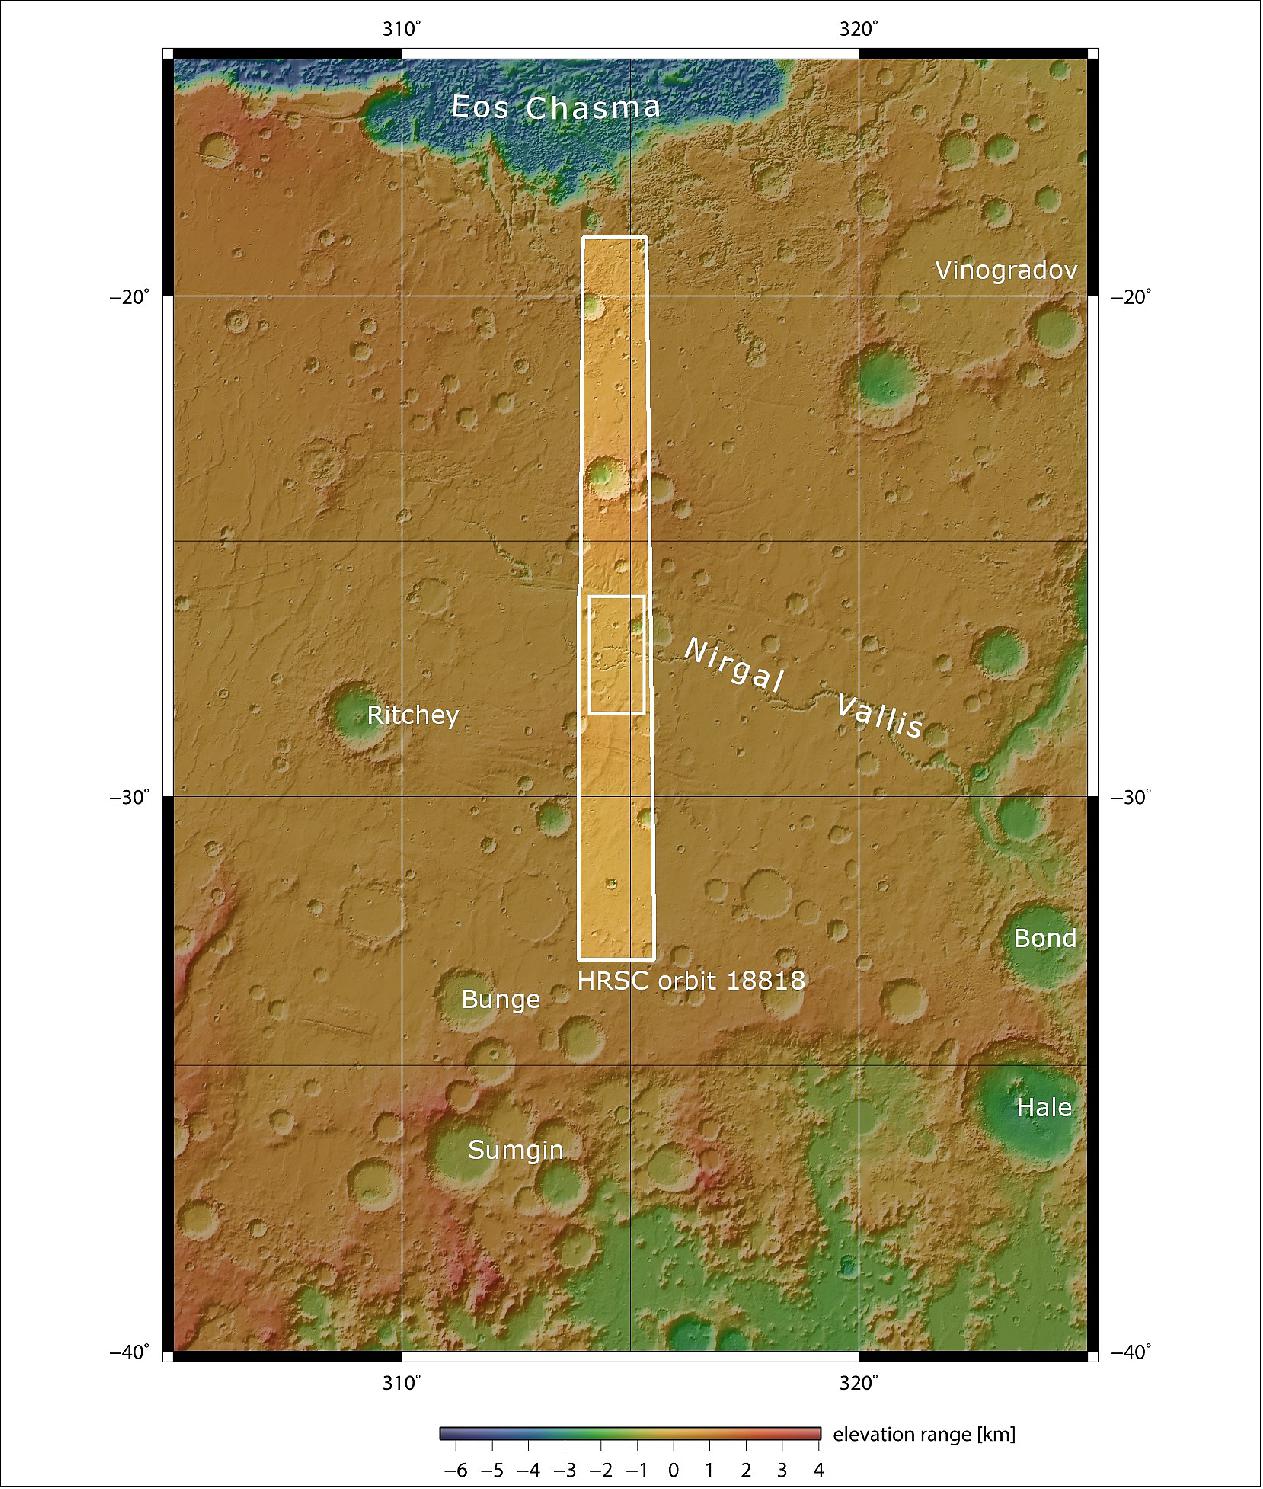 Figure 13: Nirgal Vallis in context. This image shows a dried-up river valley on Mars named Nirgal Vallis. The area outlined by the bold white box indicates the area imaged by the Mars Express High Resolution Stereo Camera on 16 November 2018 during orbit 18818 (image credit: NASA MGS MOLA Science Team)